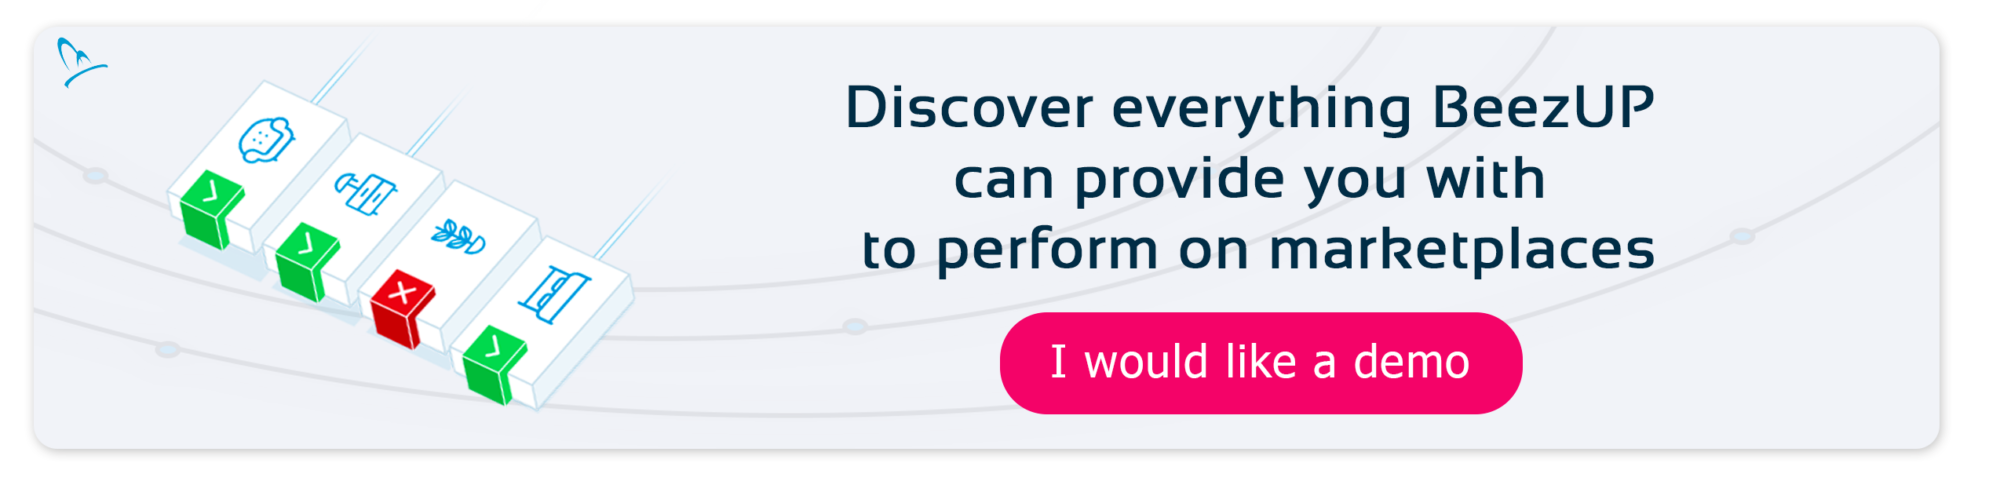 Discover everything BeezUP can provide you with to perform on marketplaces